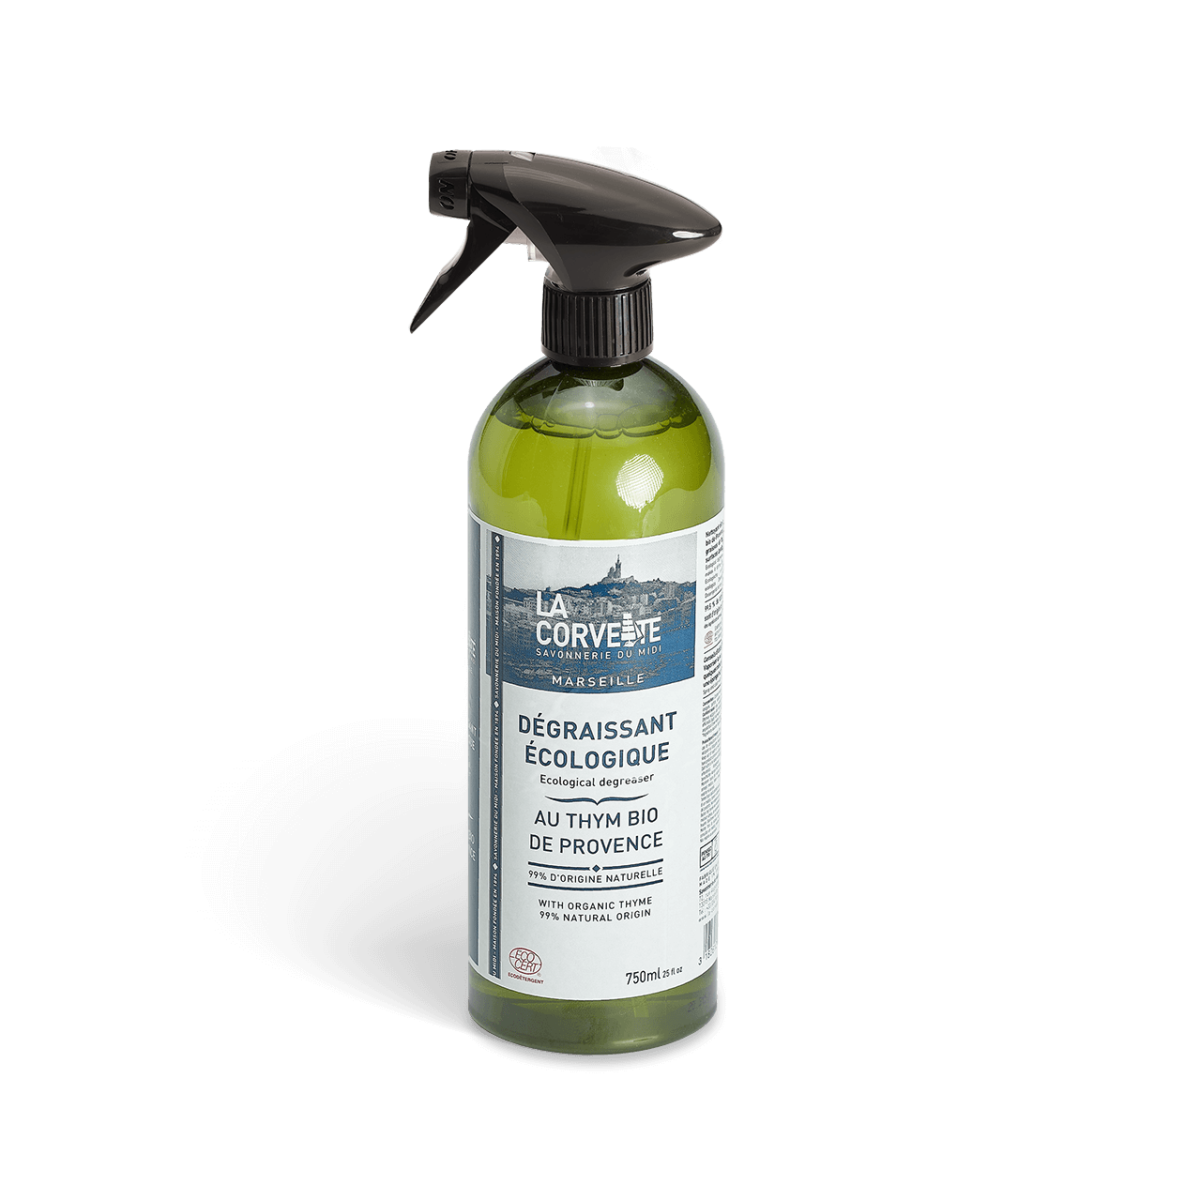 Ecological degreaser with organic thyme from Provence